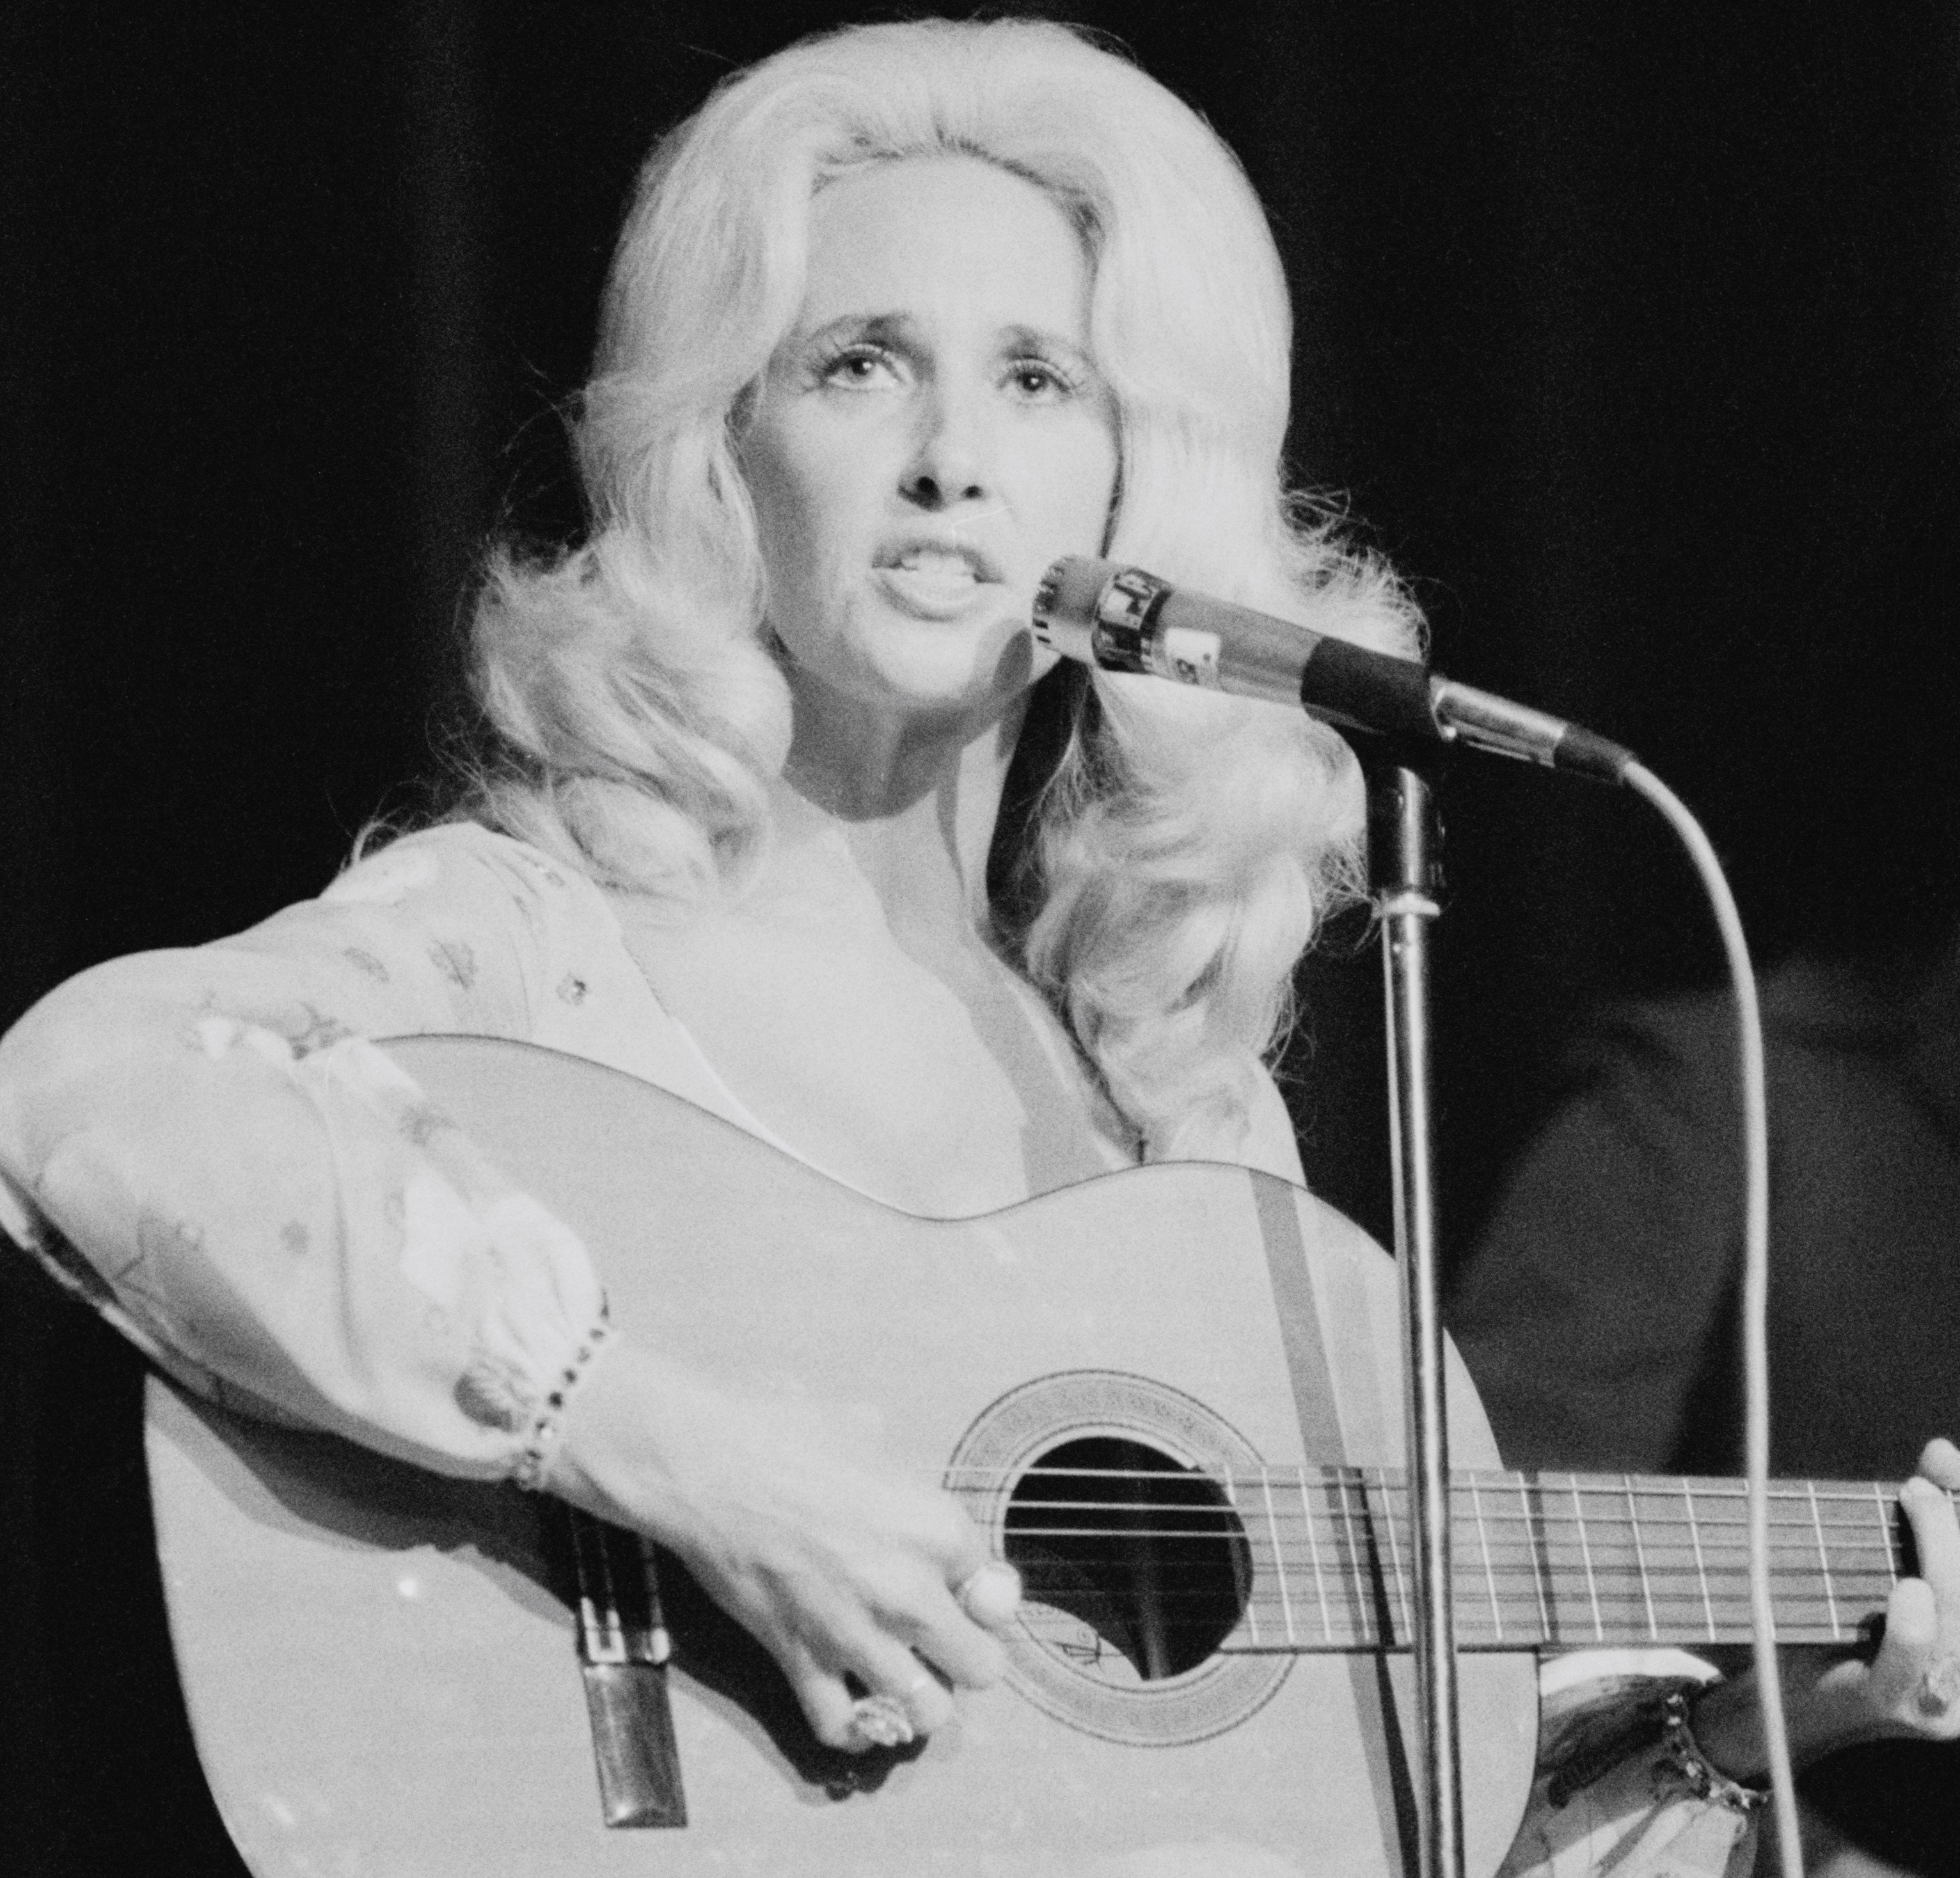 "Stand By Your Man" singer Tammy Wynette with a guitar